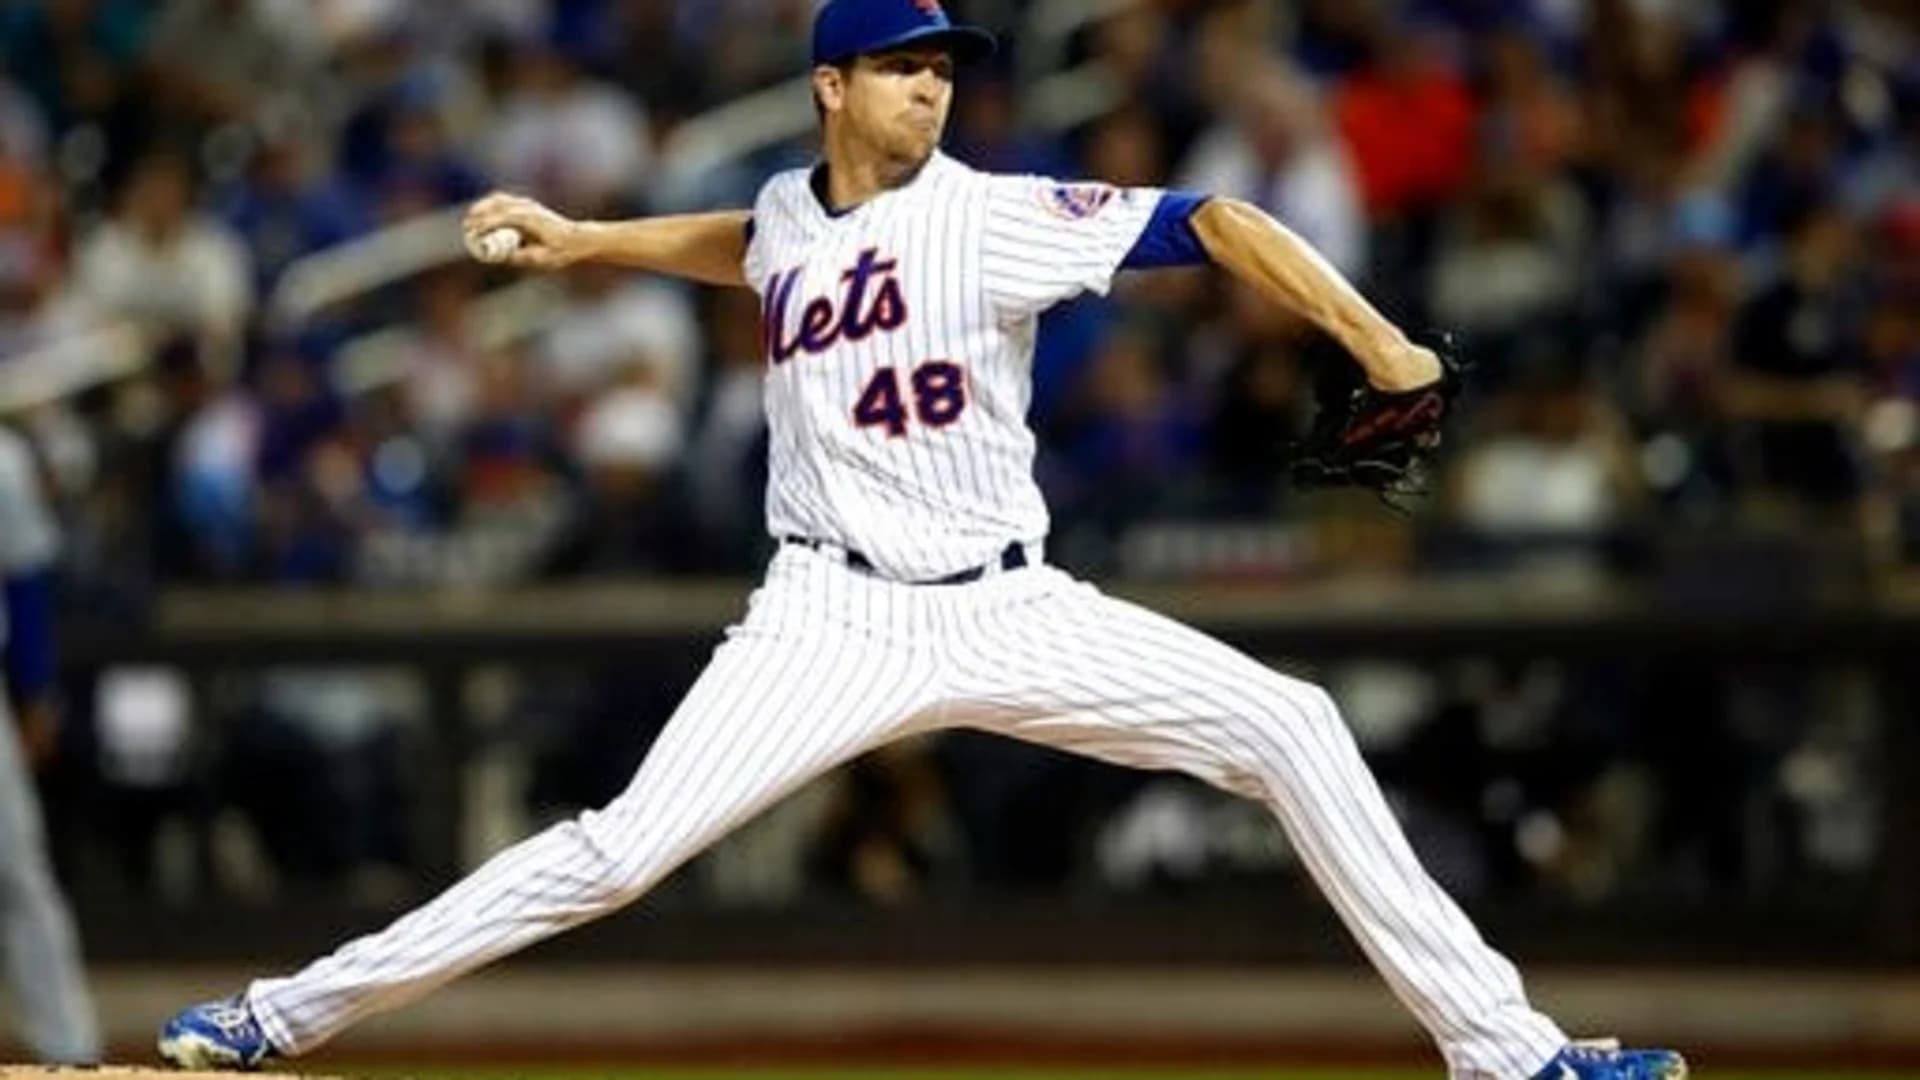 Mets ace Jacob deGrom wins back-to-back Cy Young awards